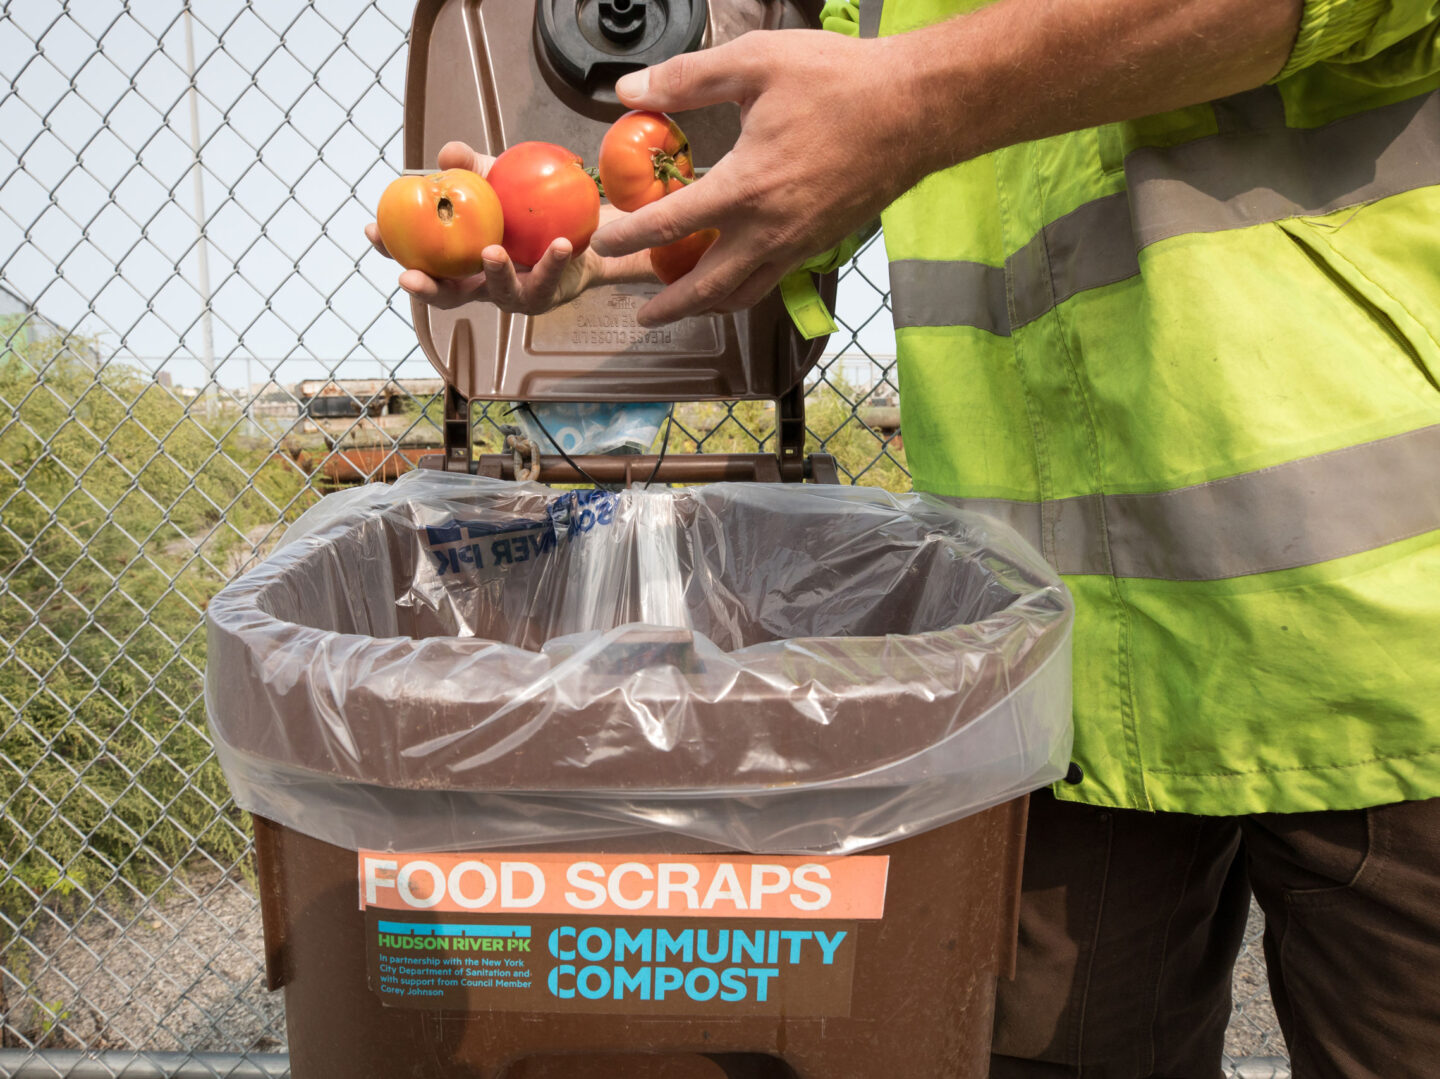 Staff drops tomatoes in Hudson River Park Community Compost bin